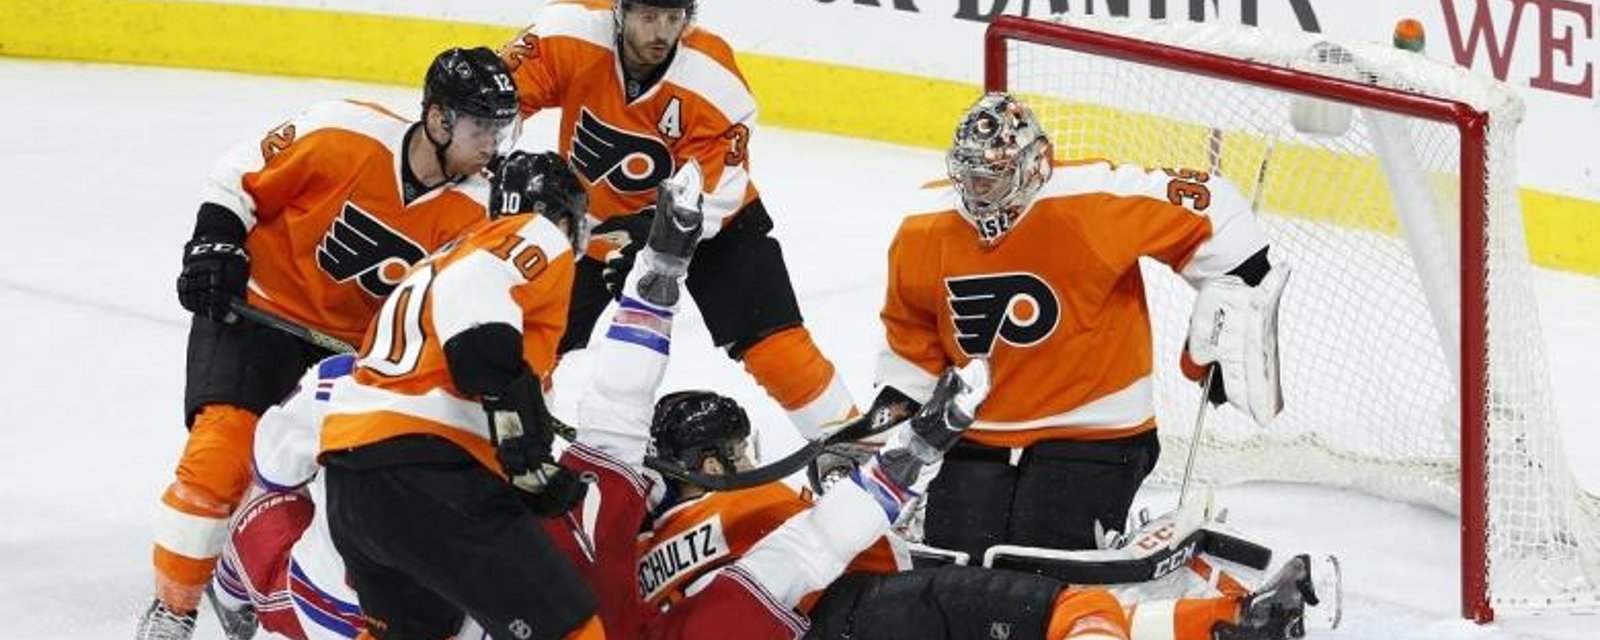 The Flyers were in fact hiding something yesterday, an injury to a core player.